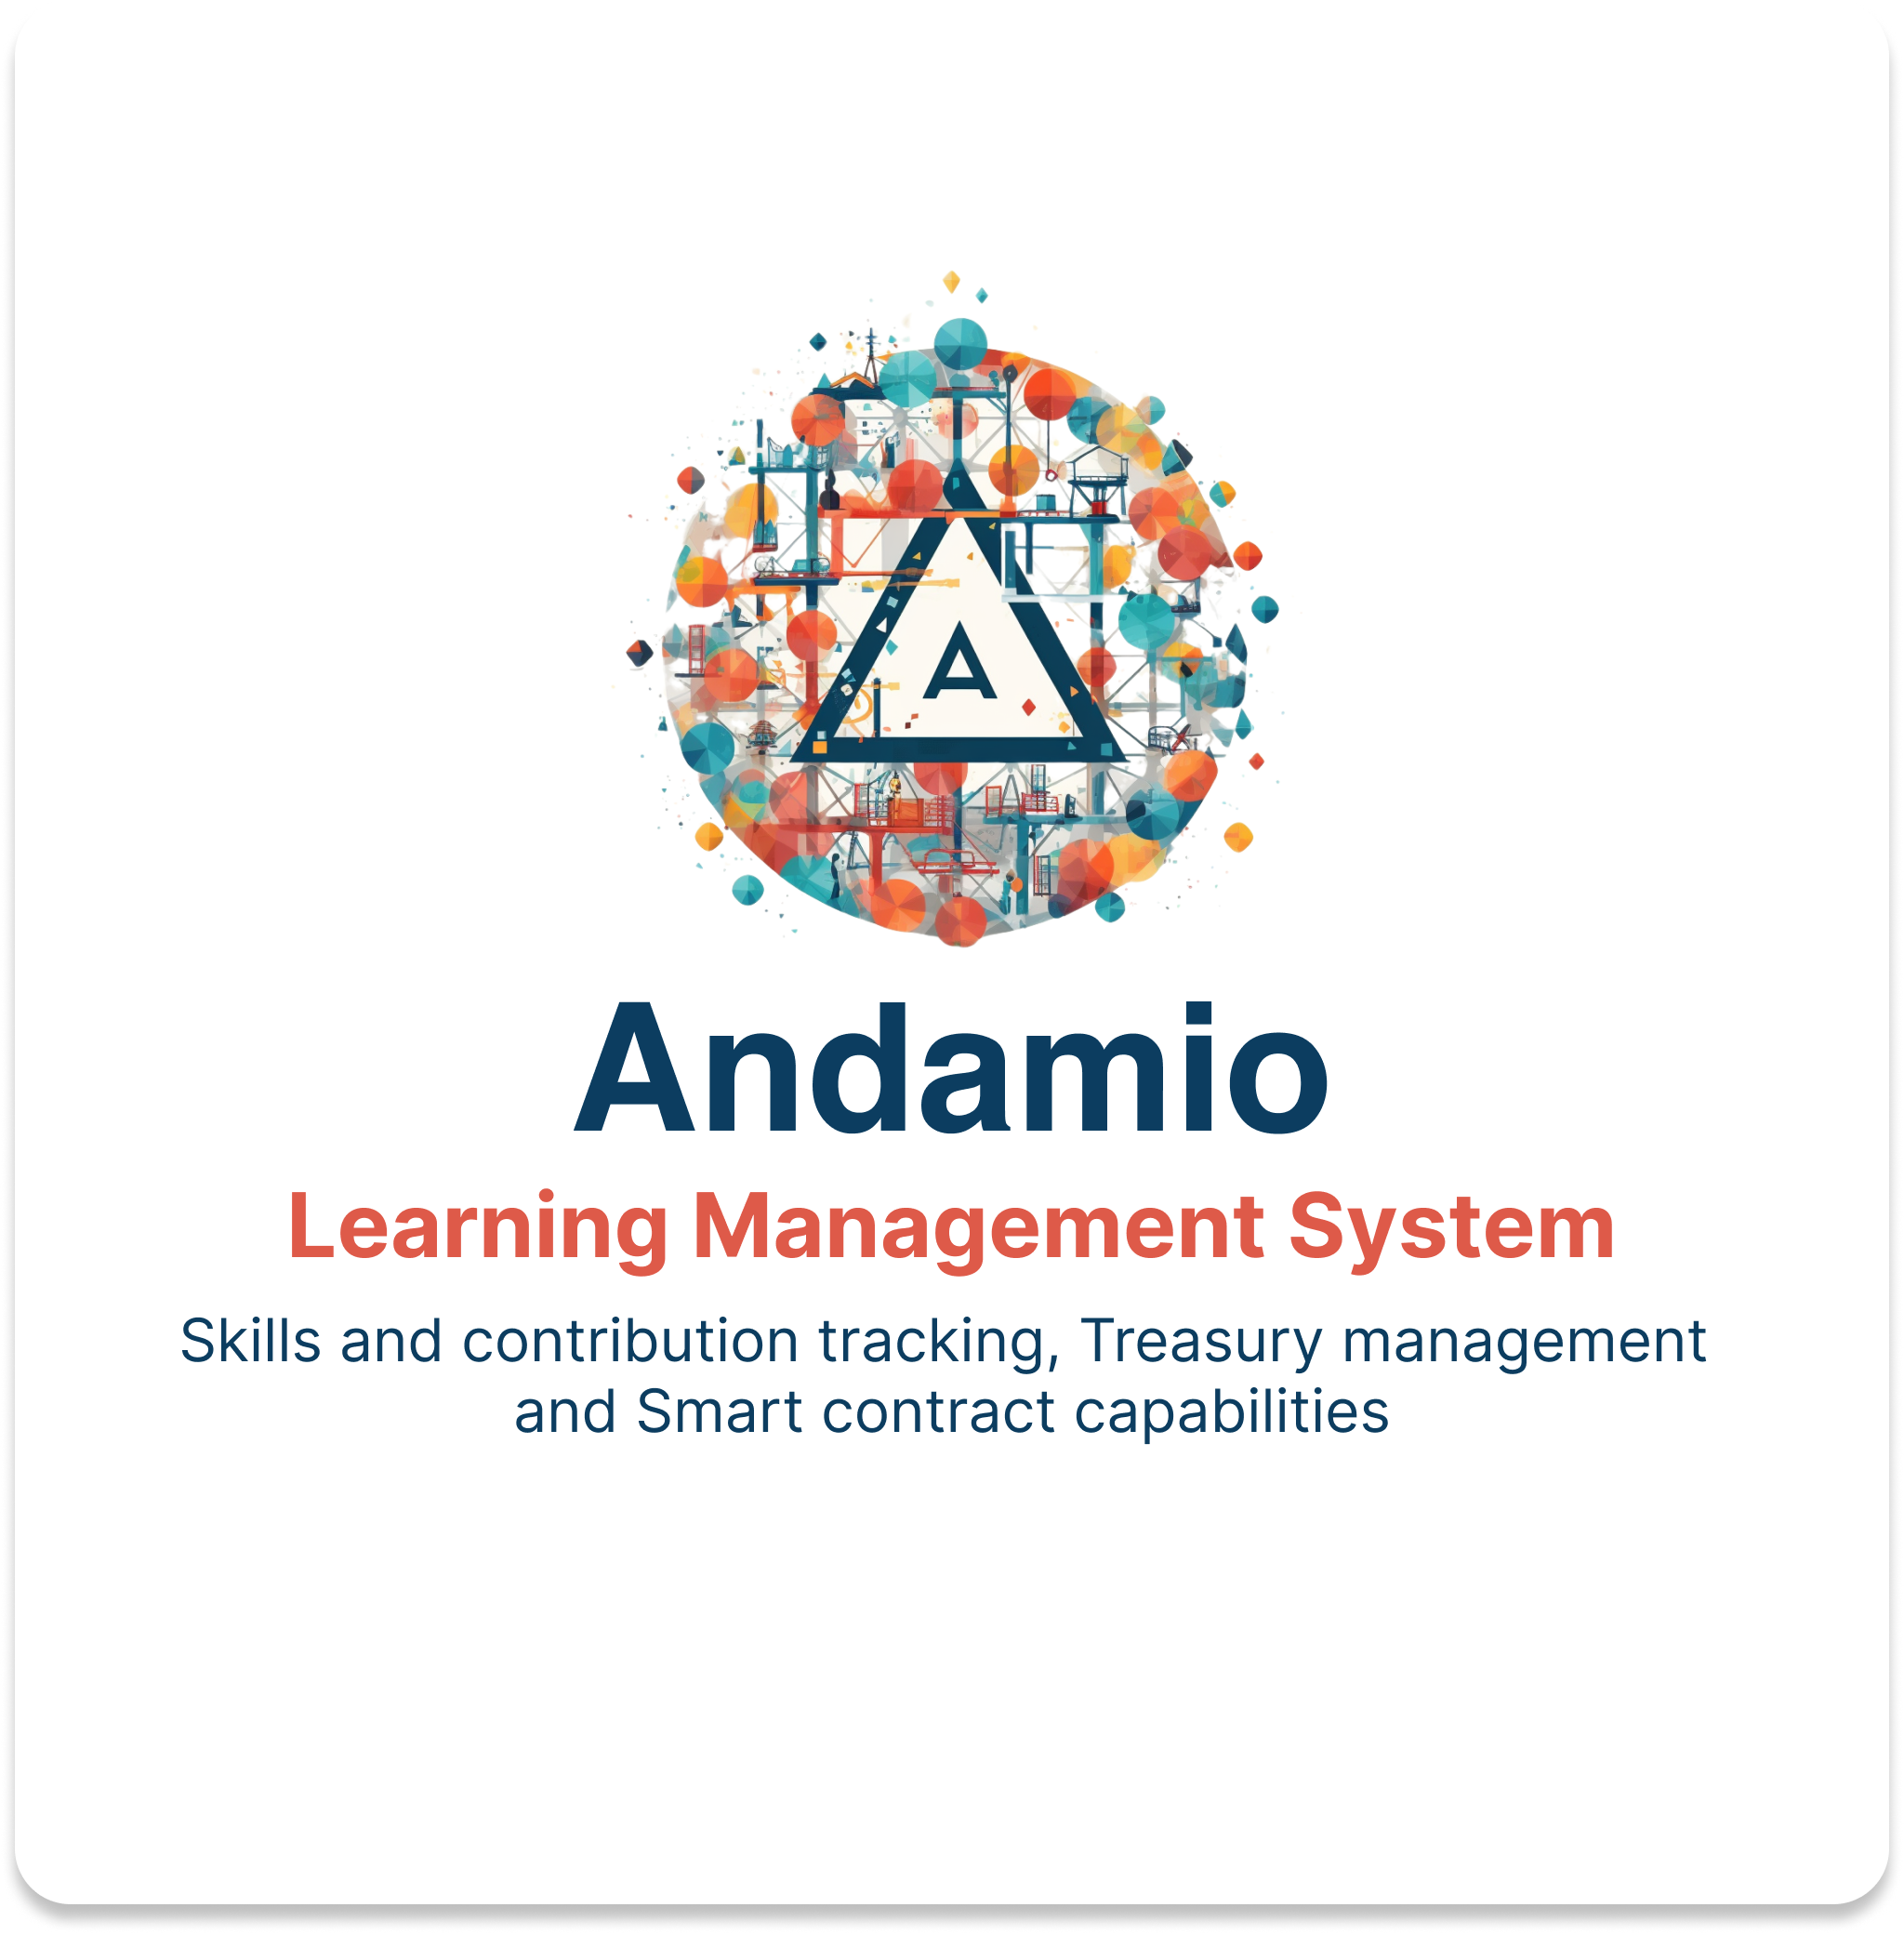 Andamio Learning Management System with skill and contribution tracking, treasury management and smart contract capabilities